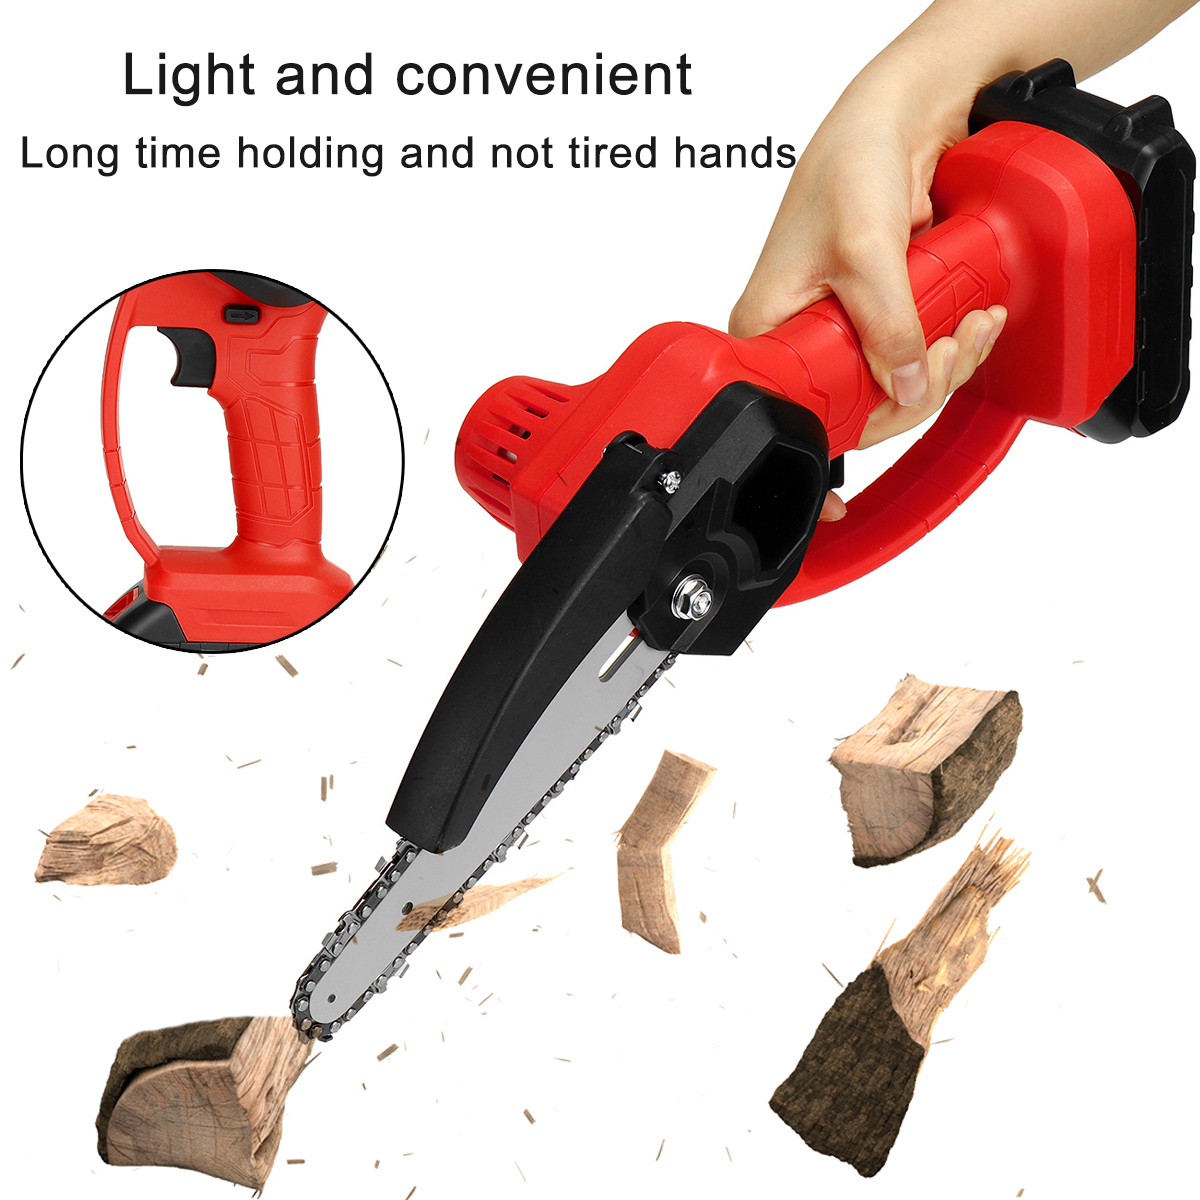 Handheld-Mini-Rechargable-Chainsaw-6-Electric-Chain-Saws-Stepless-Speed-Change-Wood-Work-Cutter-W-Ba-1837413-3